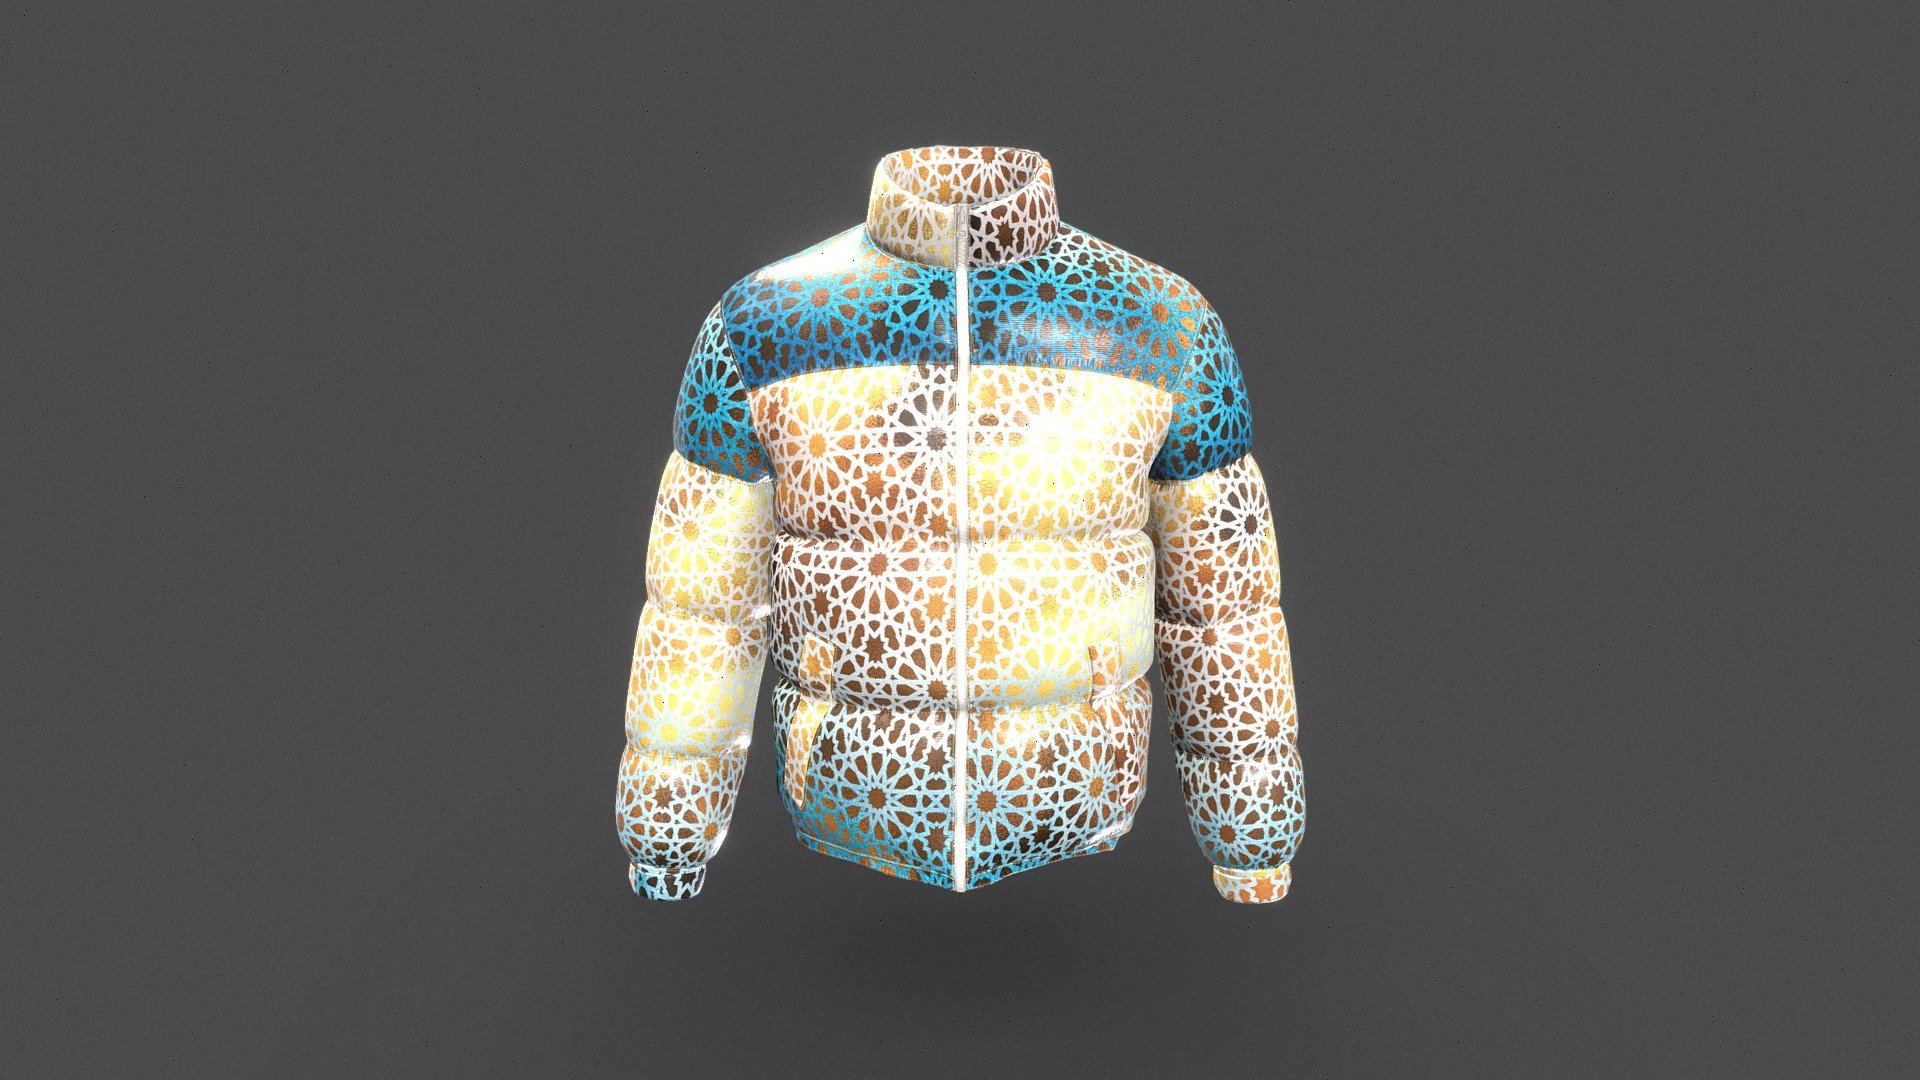 Golden Bleed Men Padded Jacket
Version V1.0

Realistic high detailed Men Padded Jacket with high resolution textures. Model created by our unique processing &amp; Optimized for 3D web and AR / VR

Features

Optimized &amp; NON-Optimized obj model with 4K texture included




Optimized for AR/VR/MR

4K &amp; 2K fabric texture and details

Optimized model is 3.08MB

NON-Optimized model is 18.2MB

Unit measurement of obj is cm

Woven fabric texture and print details included

GLB file in 2k texture size is 3.58MB

GLB file in 4k texture size is 10.0MB  (Game &amp; Animation Ready)

Unit measurement of glb is meter

Suitable for web application configurator development.

Fully unwrap UV

The model has 1 material

Includes high detailed normal map

Unit measurement was inch

Triangular Mesh with 17.3k Vertices

Texture map: Base color, OcclusionRoughnessMetallic(ORM), Normal

For more details or custom order send email: hello@binarycloth.com


Website:binarycloth.com - Golden Bleed Men Padded Apparel Jacket - Buy Royalty Free 3D model by BINARYCLOTH (@binaryclothofficial) 3d model